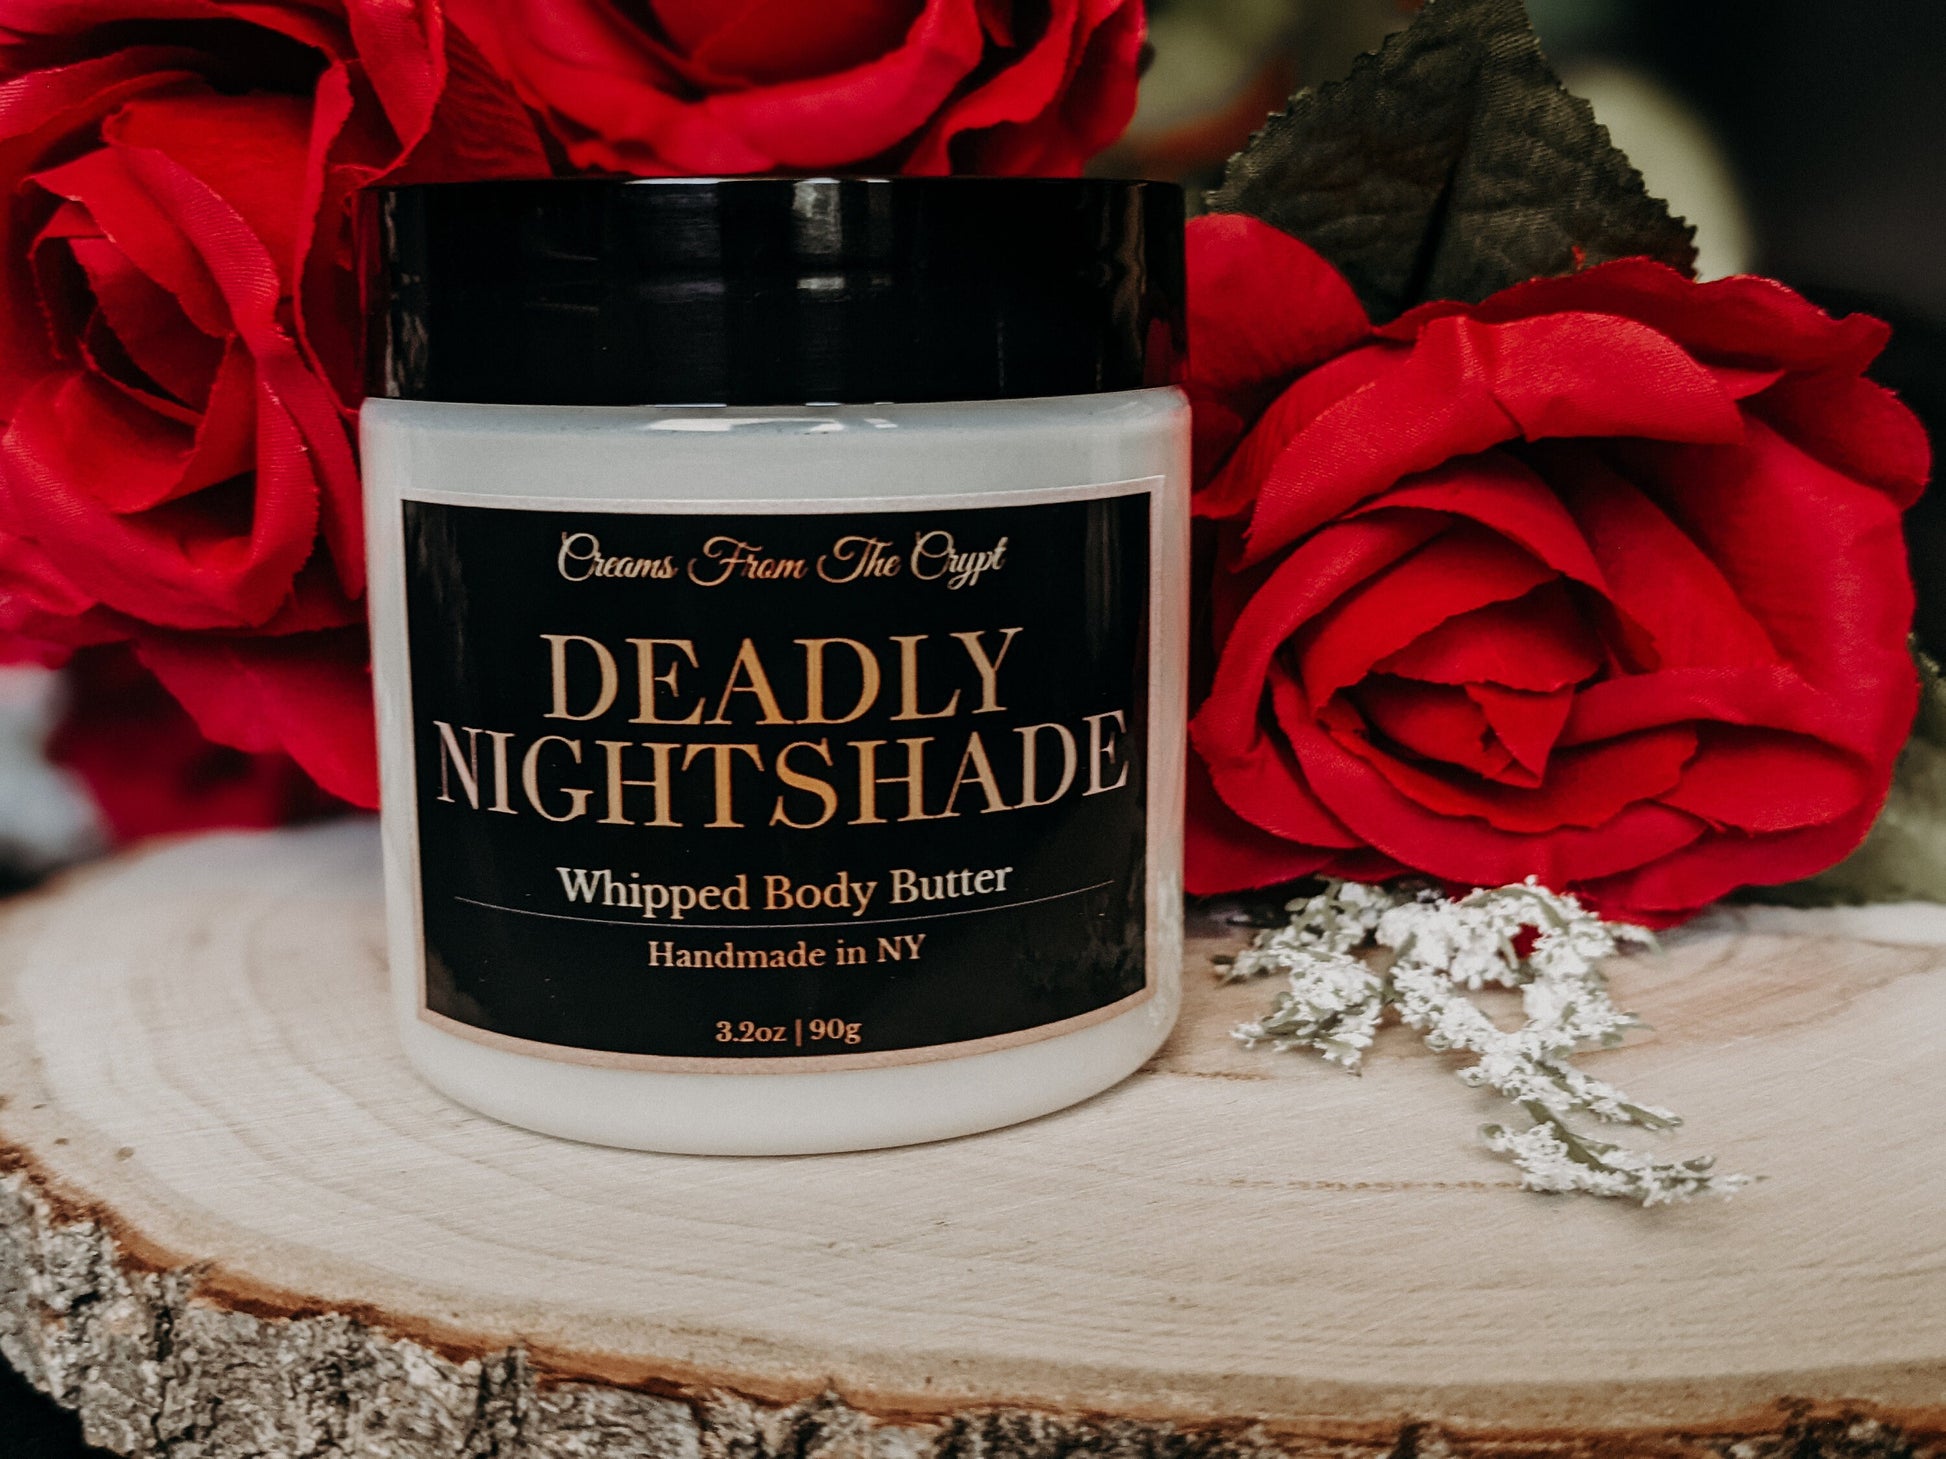 DEADLY NIGHTSHADE - Floral Sandalwood scented, Vegan whipped body butter, Shea, mango butter, moisturizer, gothic skincare, floral fragrance